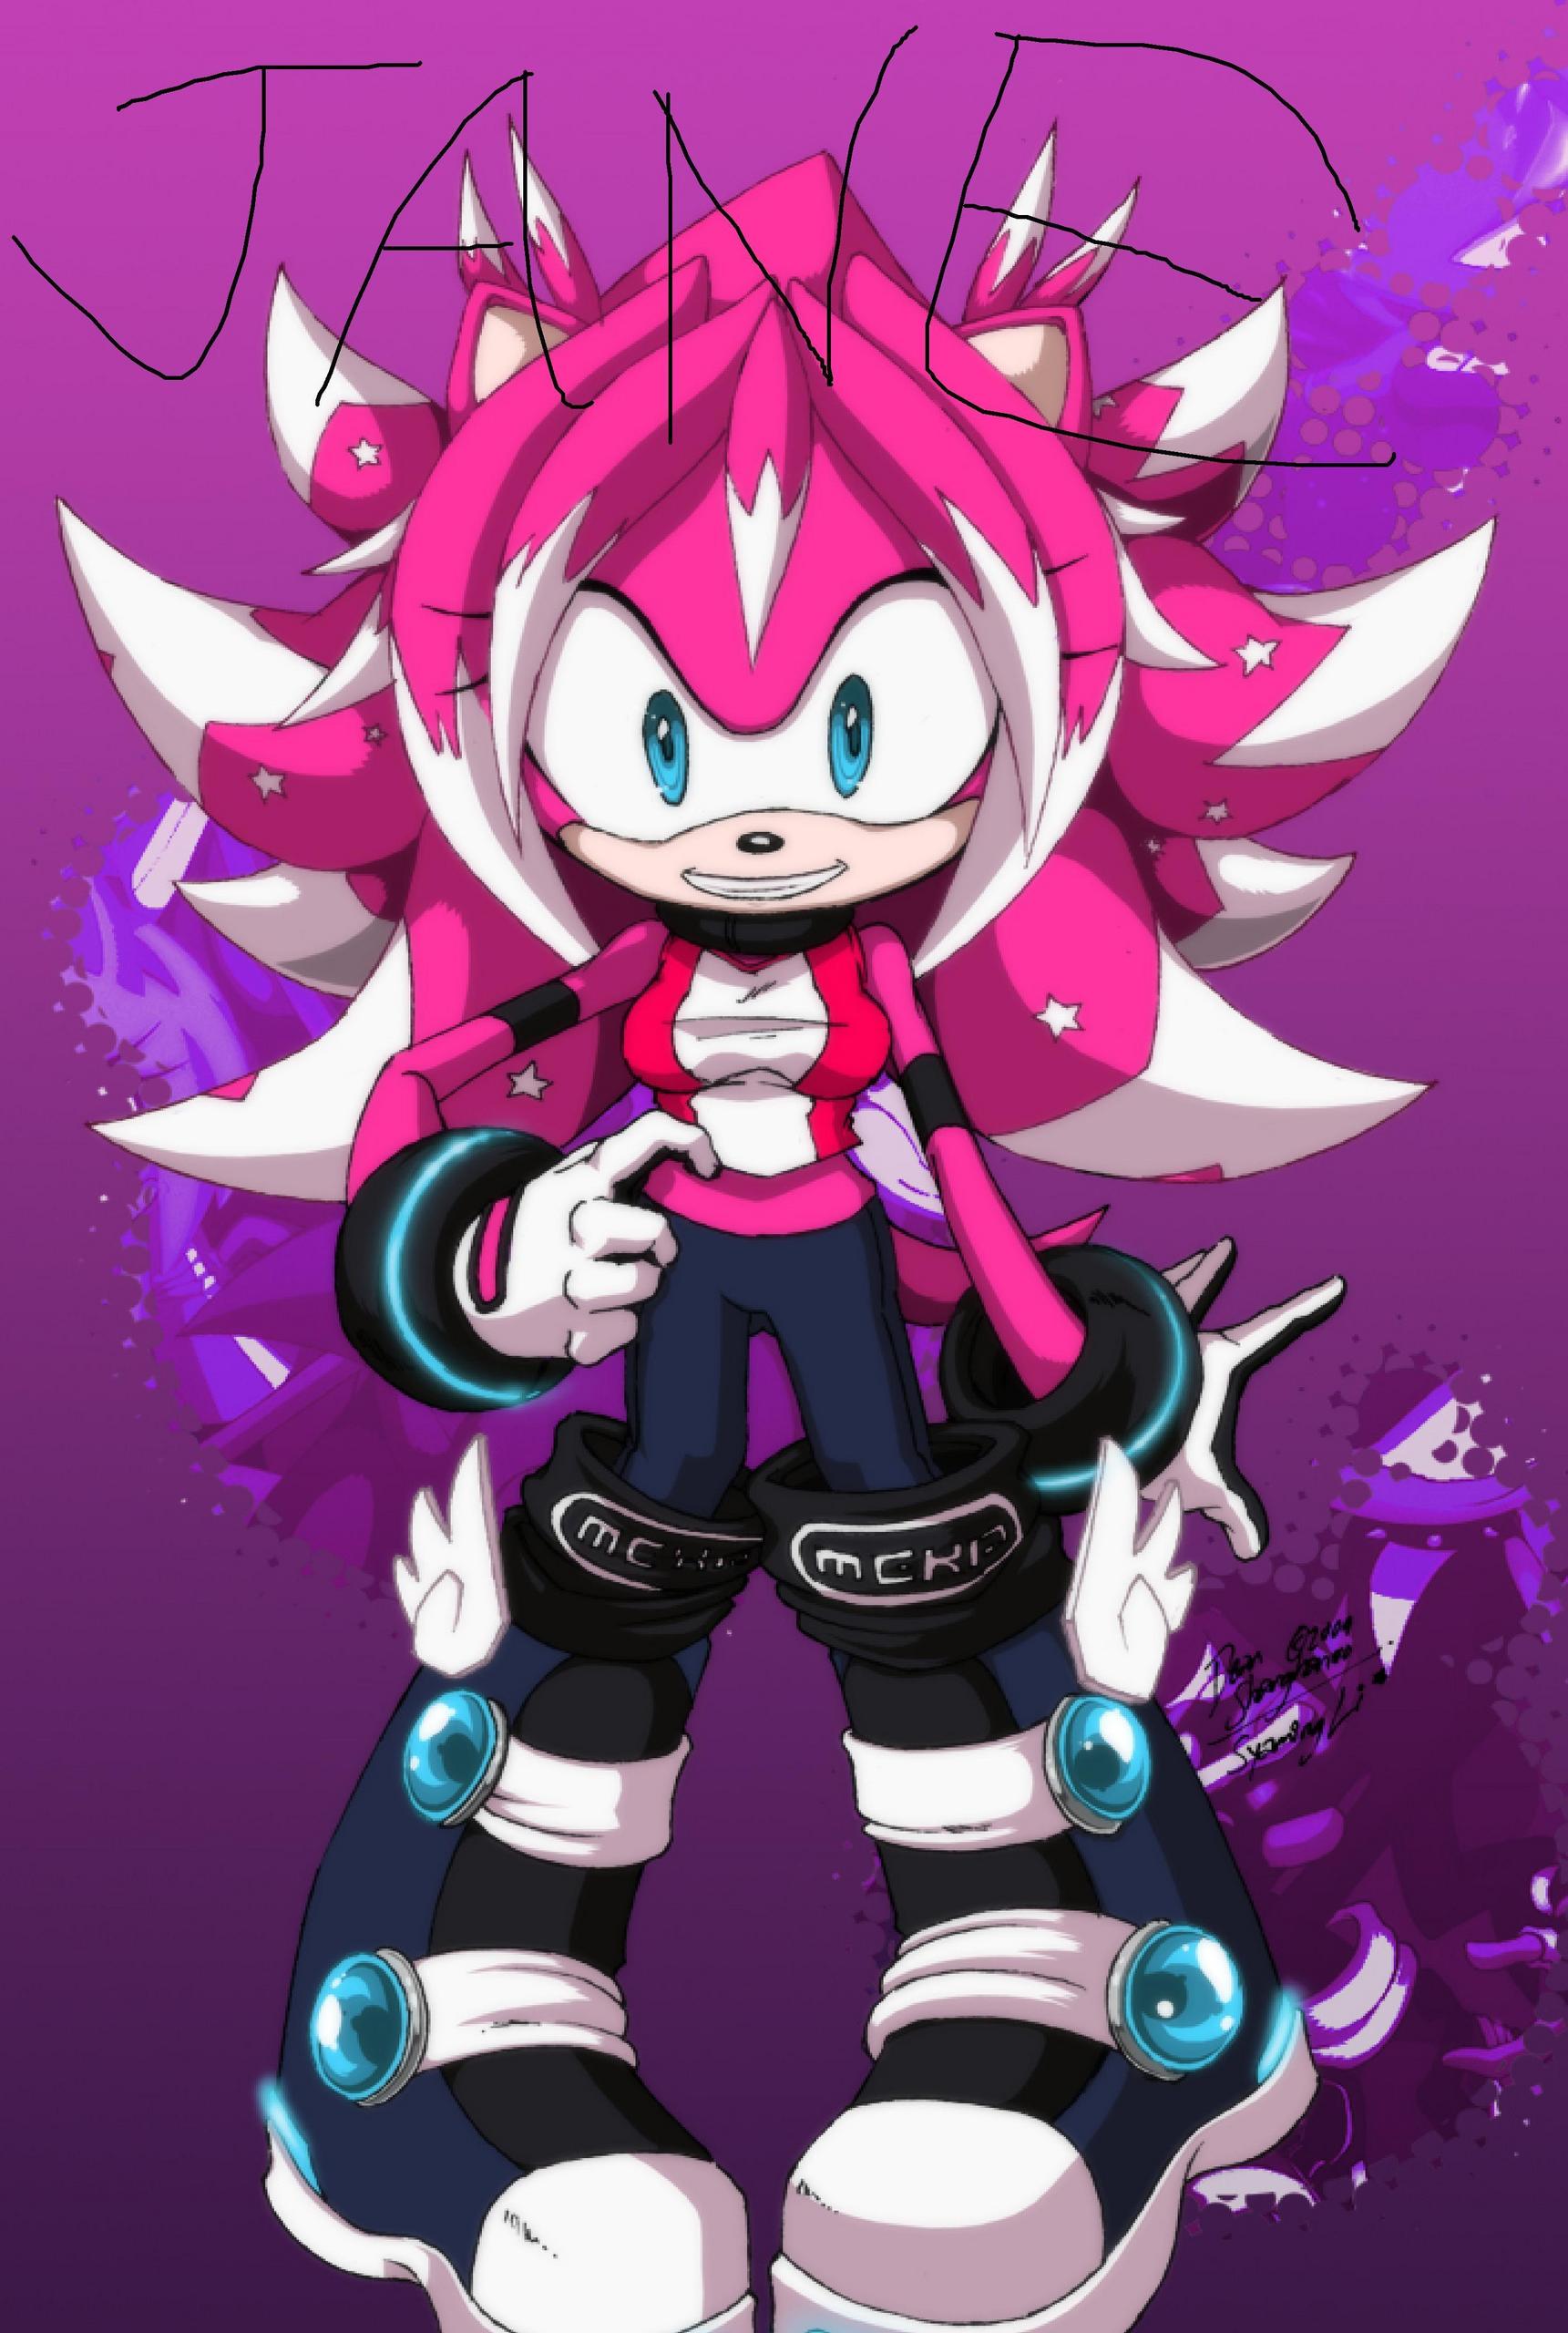 Nicole The Hedgehog Fan Fiction Wiki You Can Write And Show Your